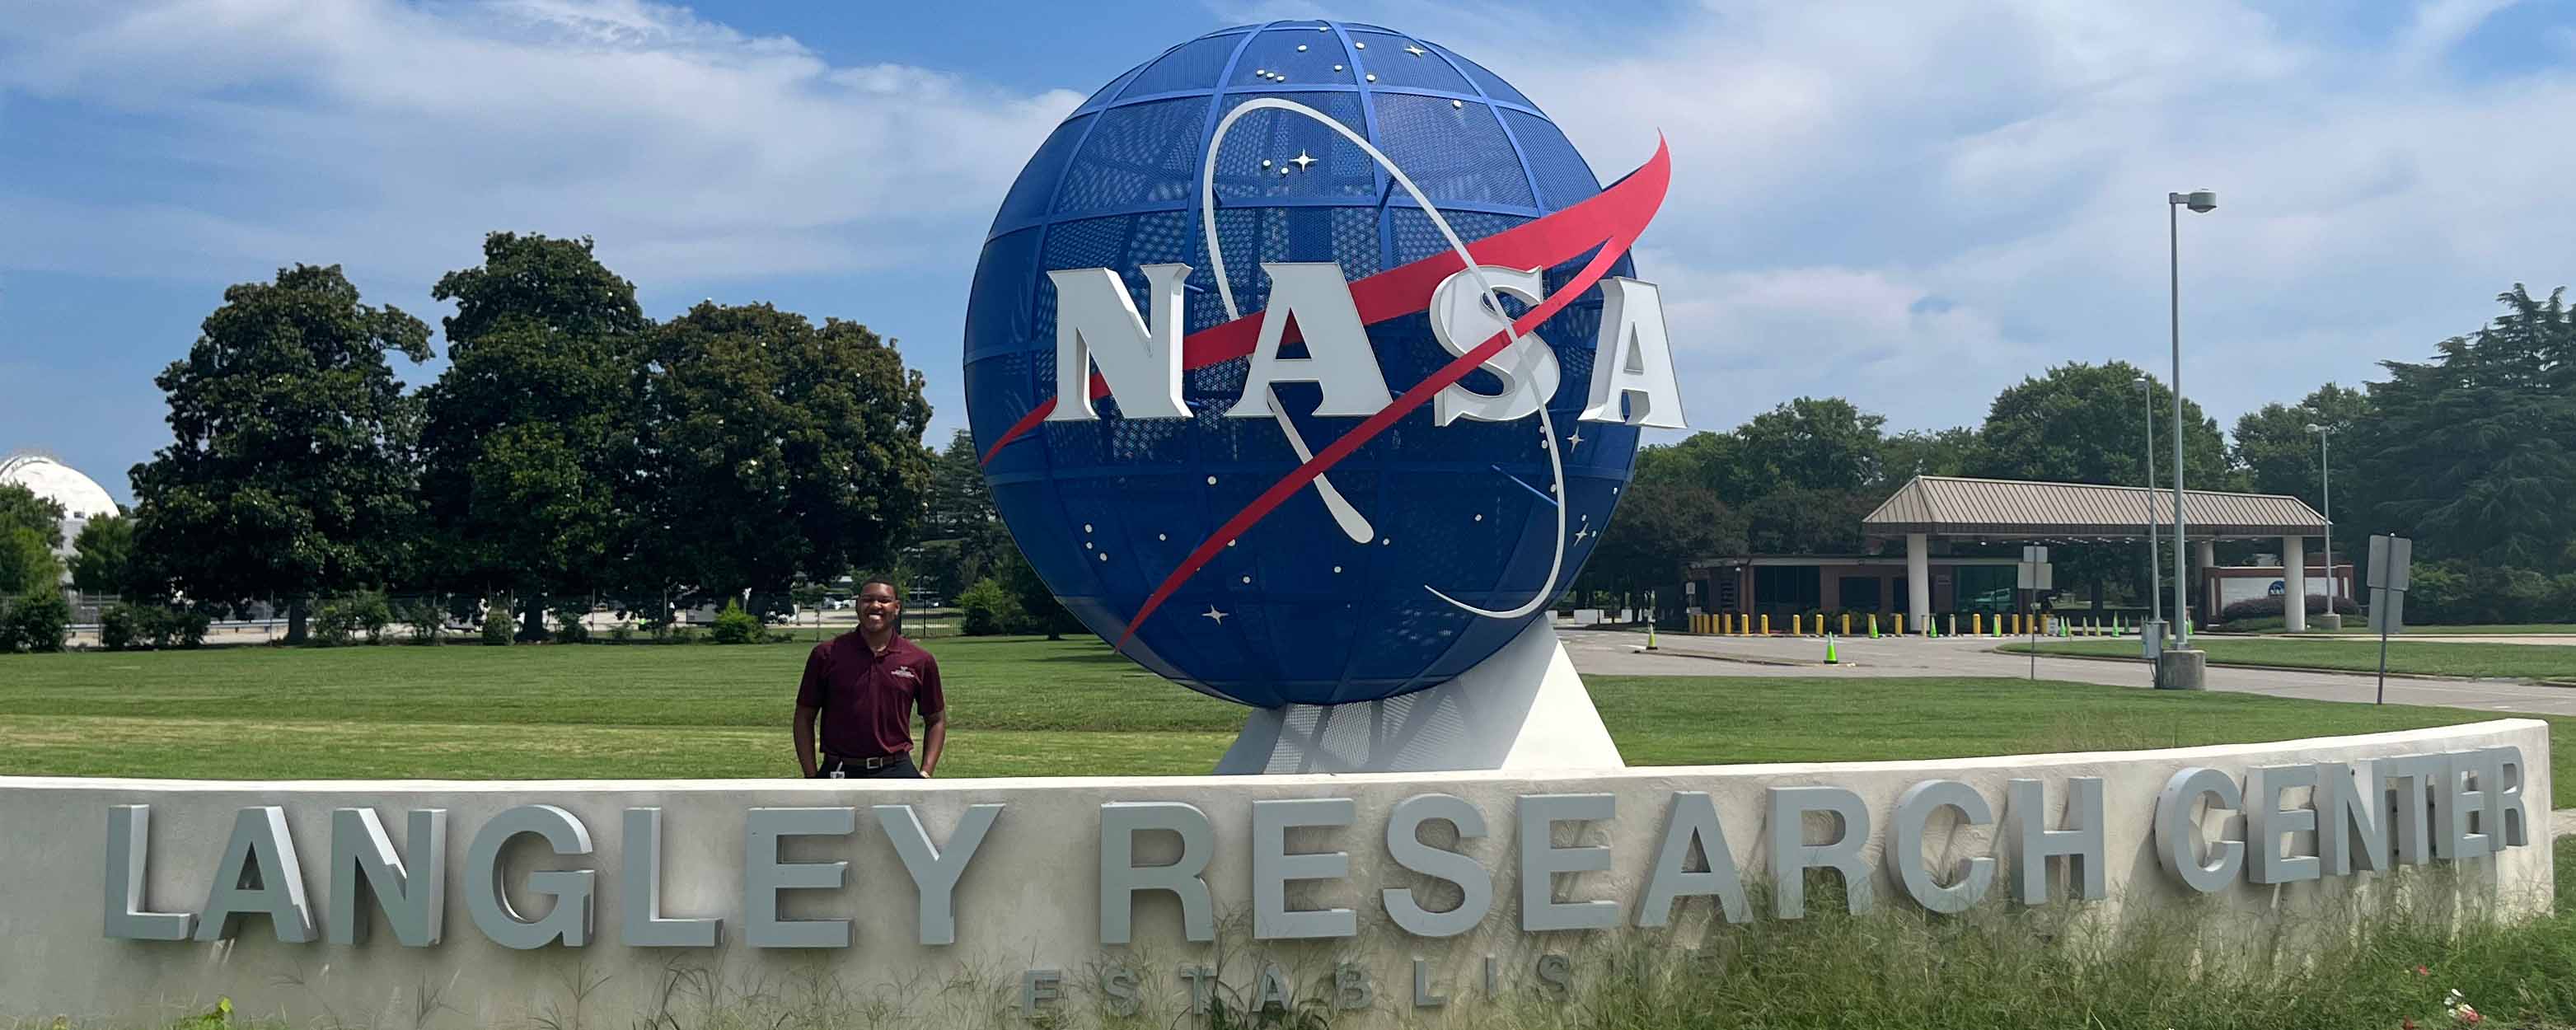 An intern standing under the NASA logo as a sphere at the entrance of Langley Research Center.